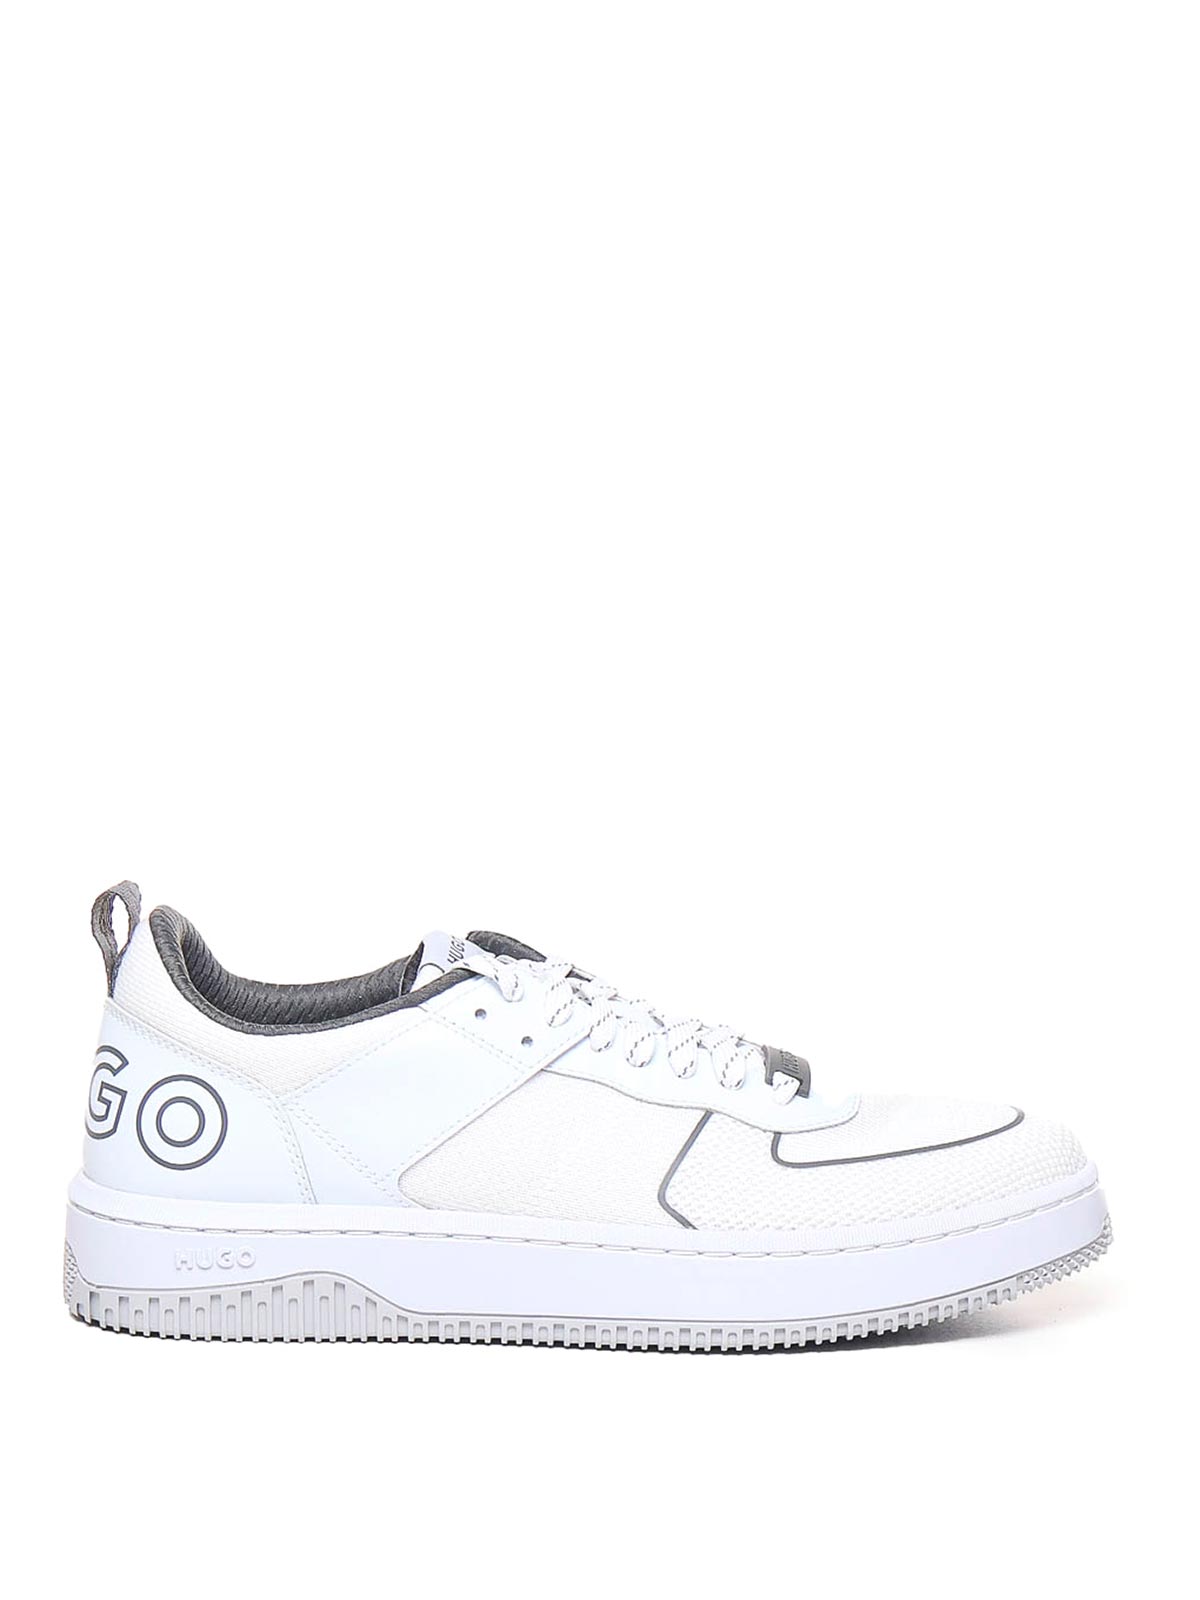 Hugo Boss Leather Sneakers In White